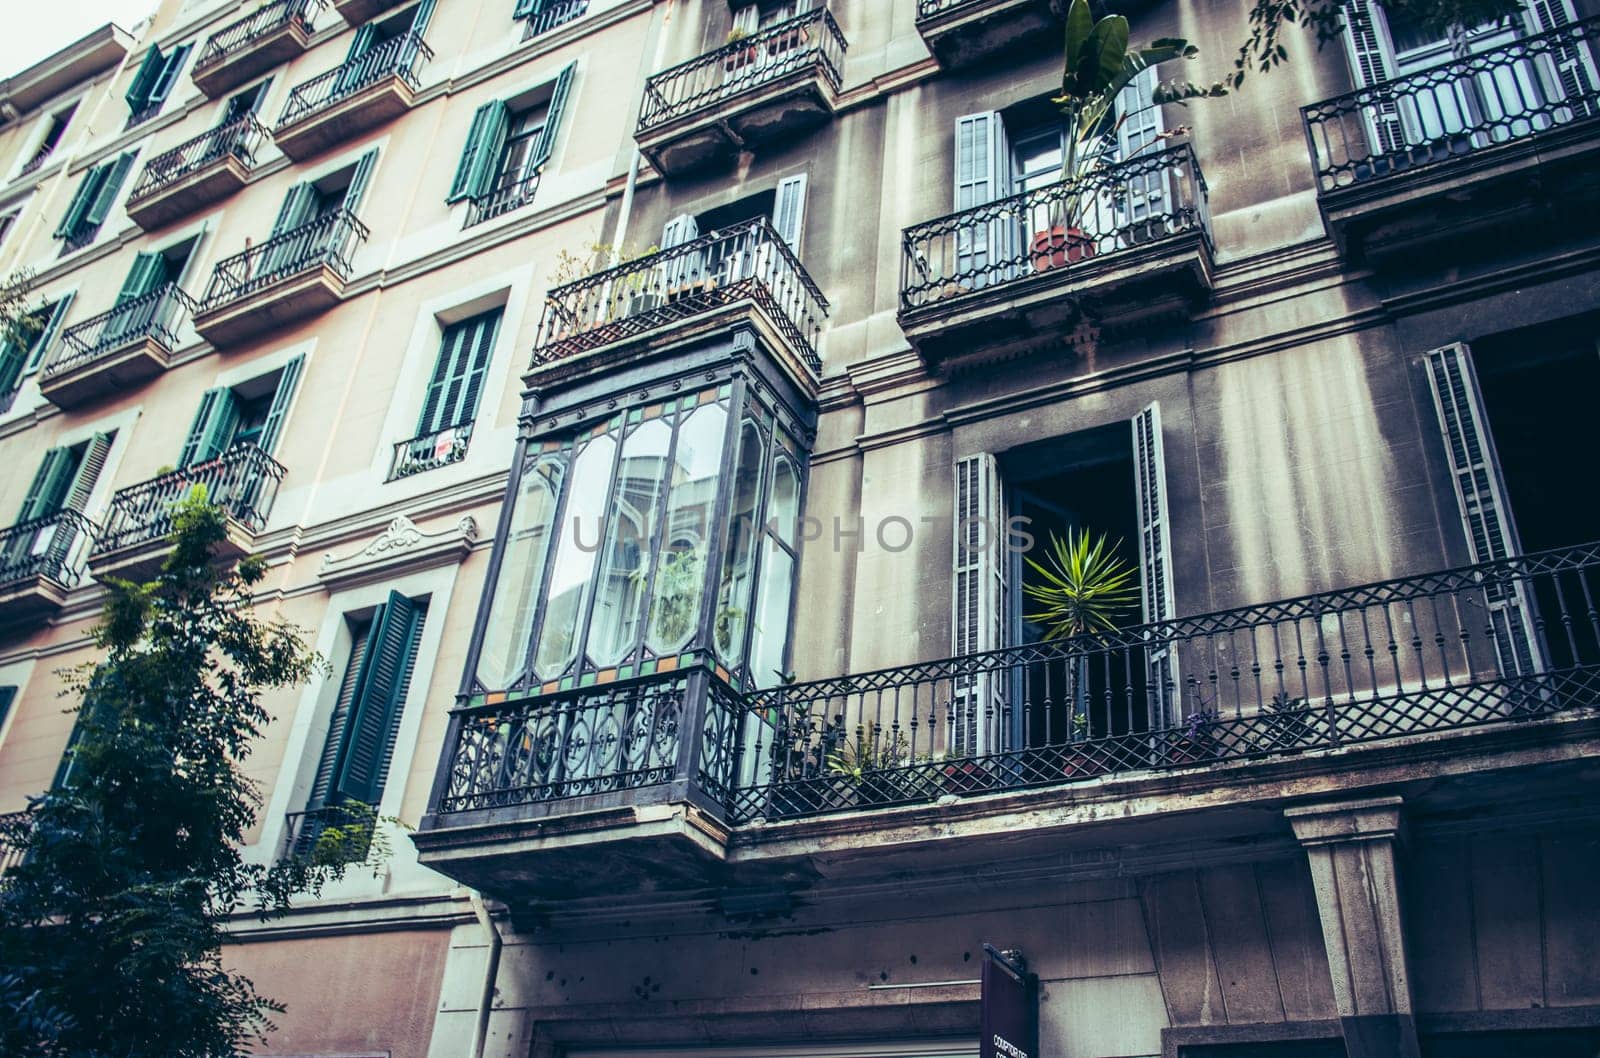 Facade of old apartment building with balcony, Barcelona, Catalonia. Spain photo. by _Nataly_Nati_